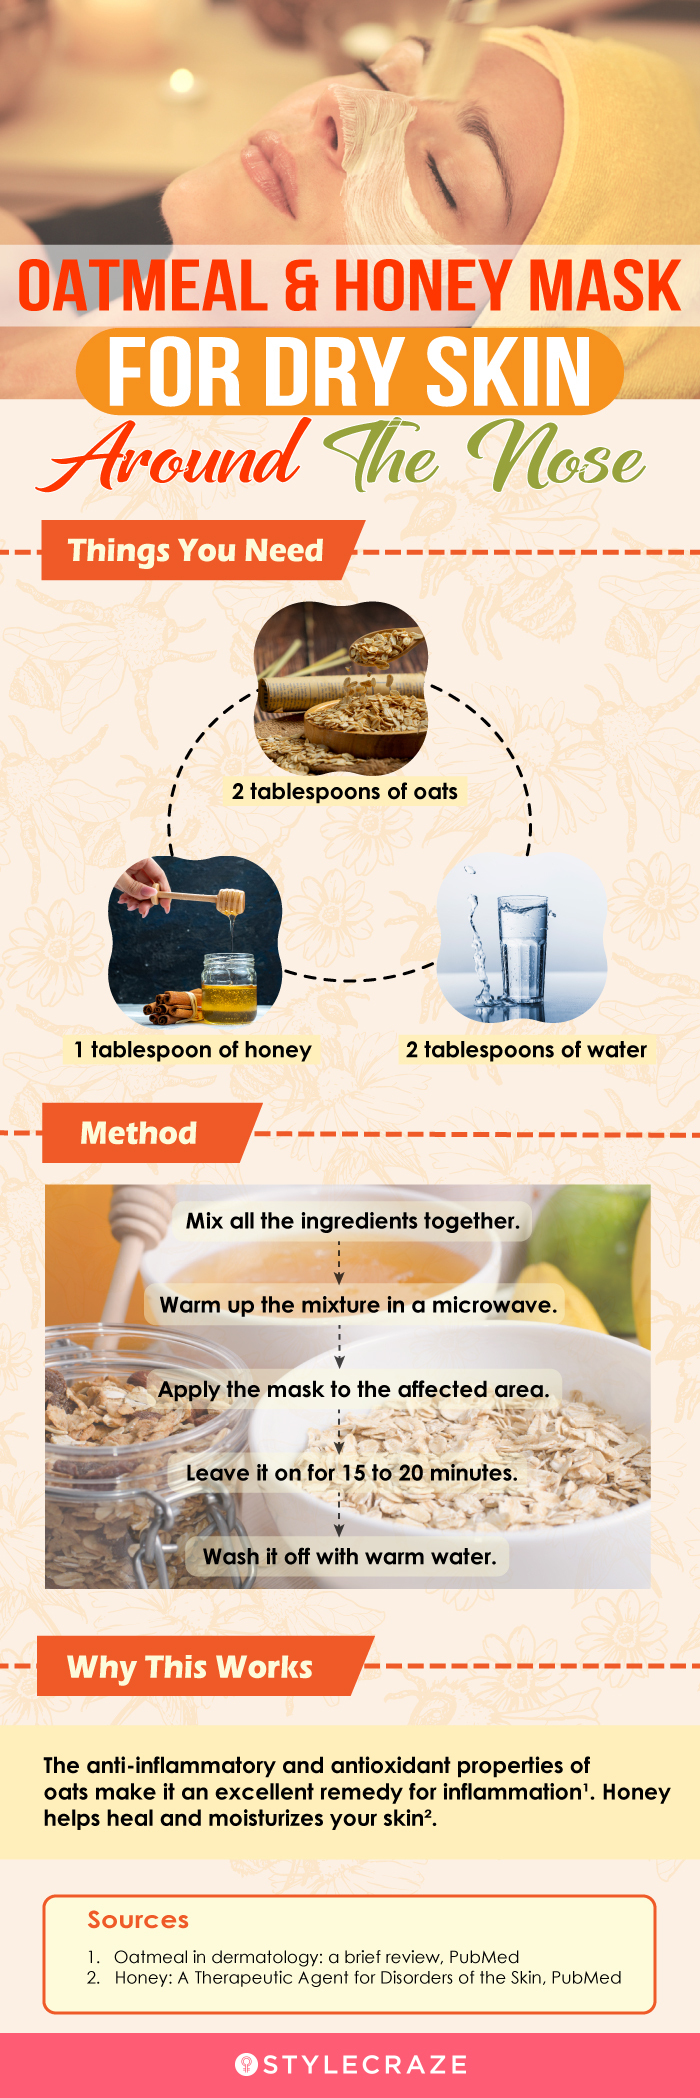 oatmeal & honey mask for dry skin around the nose (infographic)